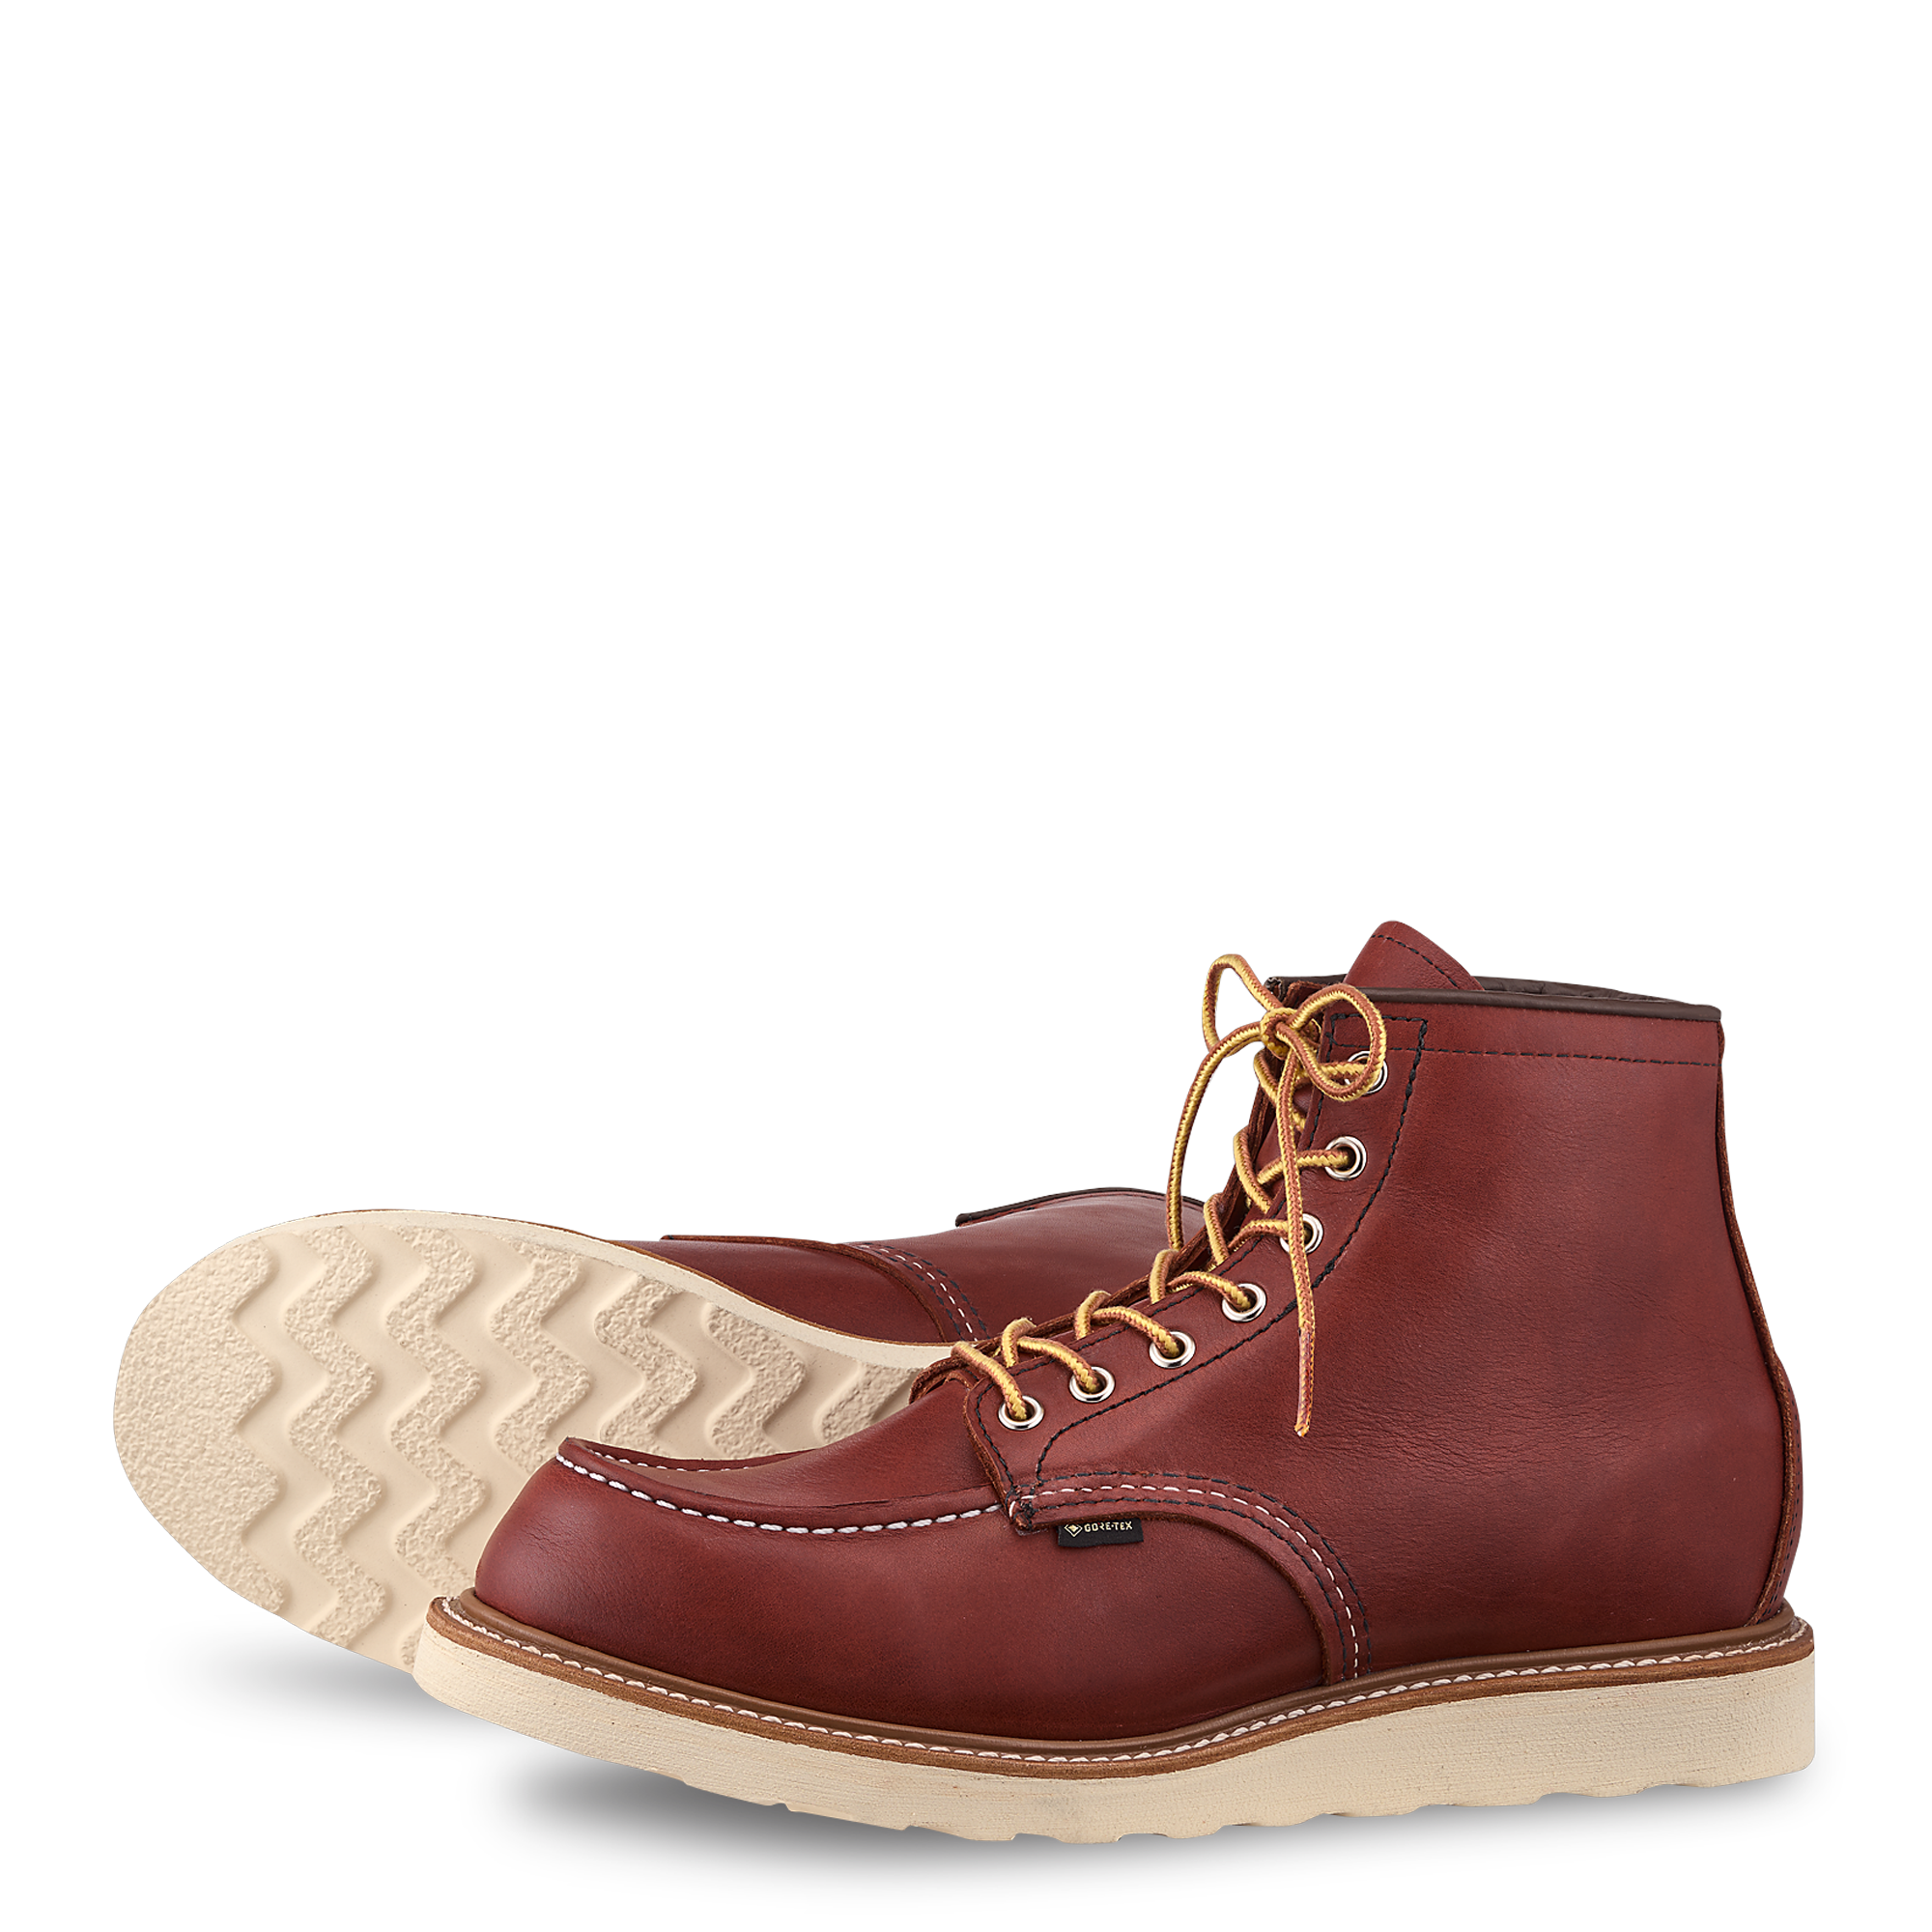 Red Wing Boots Online - Free shipping within